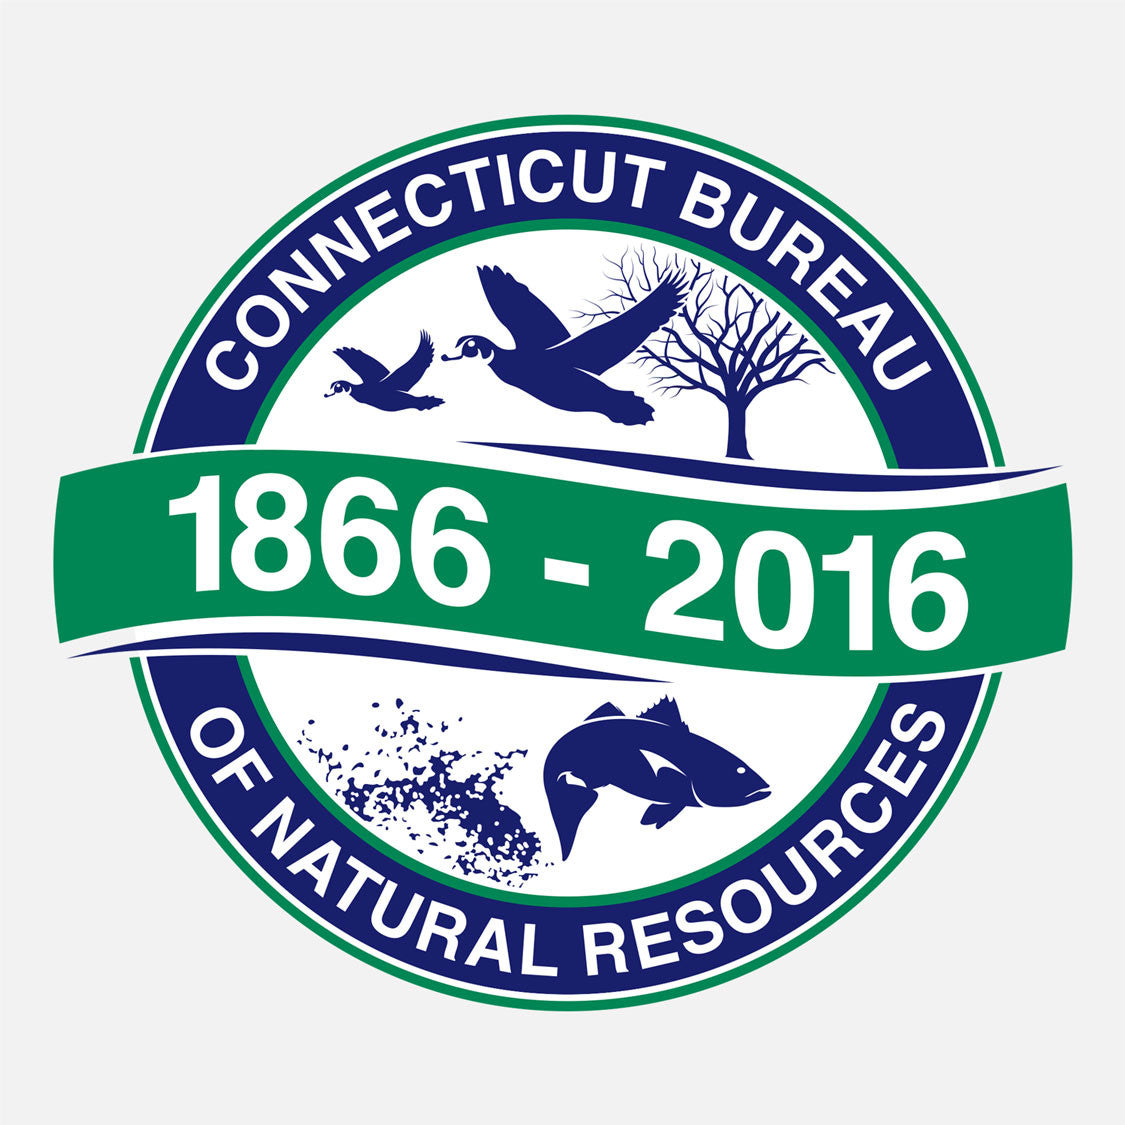 The Connecticut Bureau of Natural Resources recognizing their 150 year anniversary. The logo features a graphic of ducks and fish.